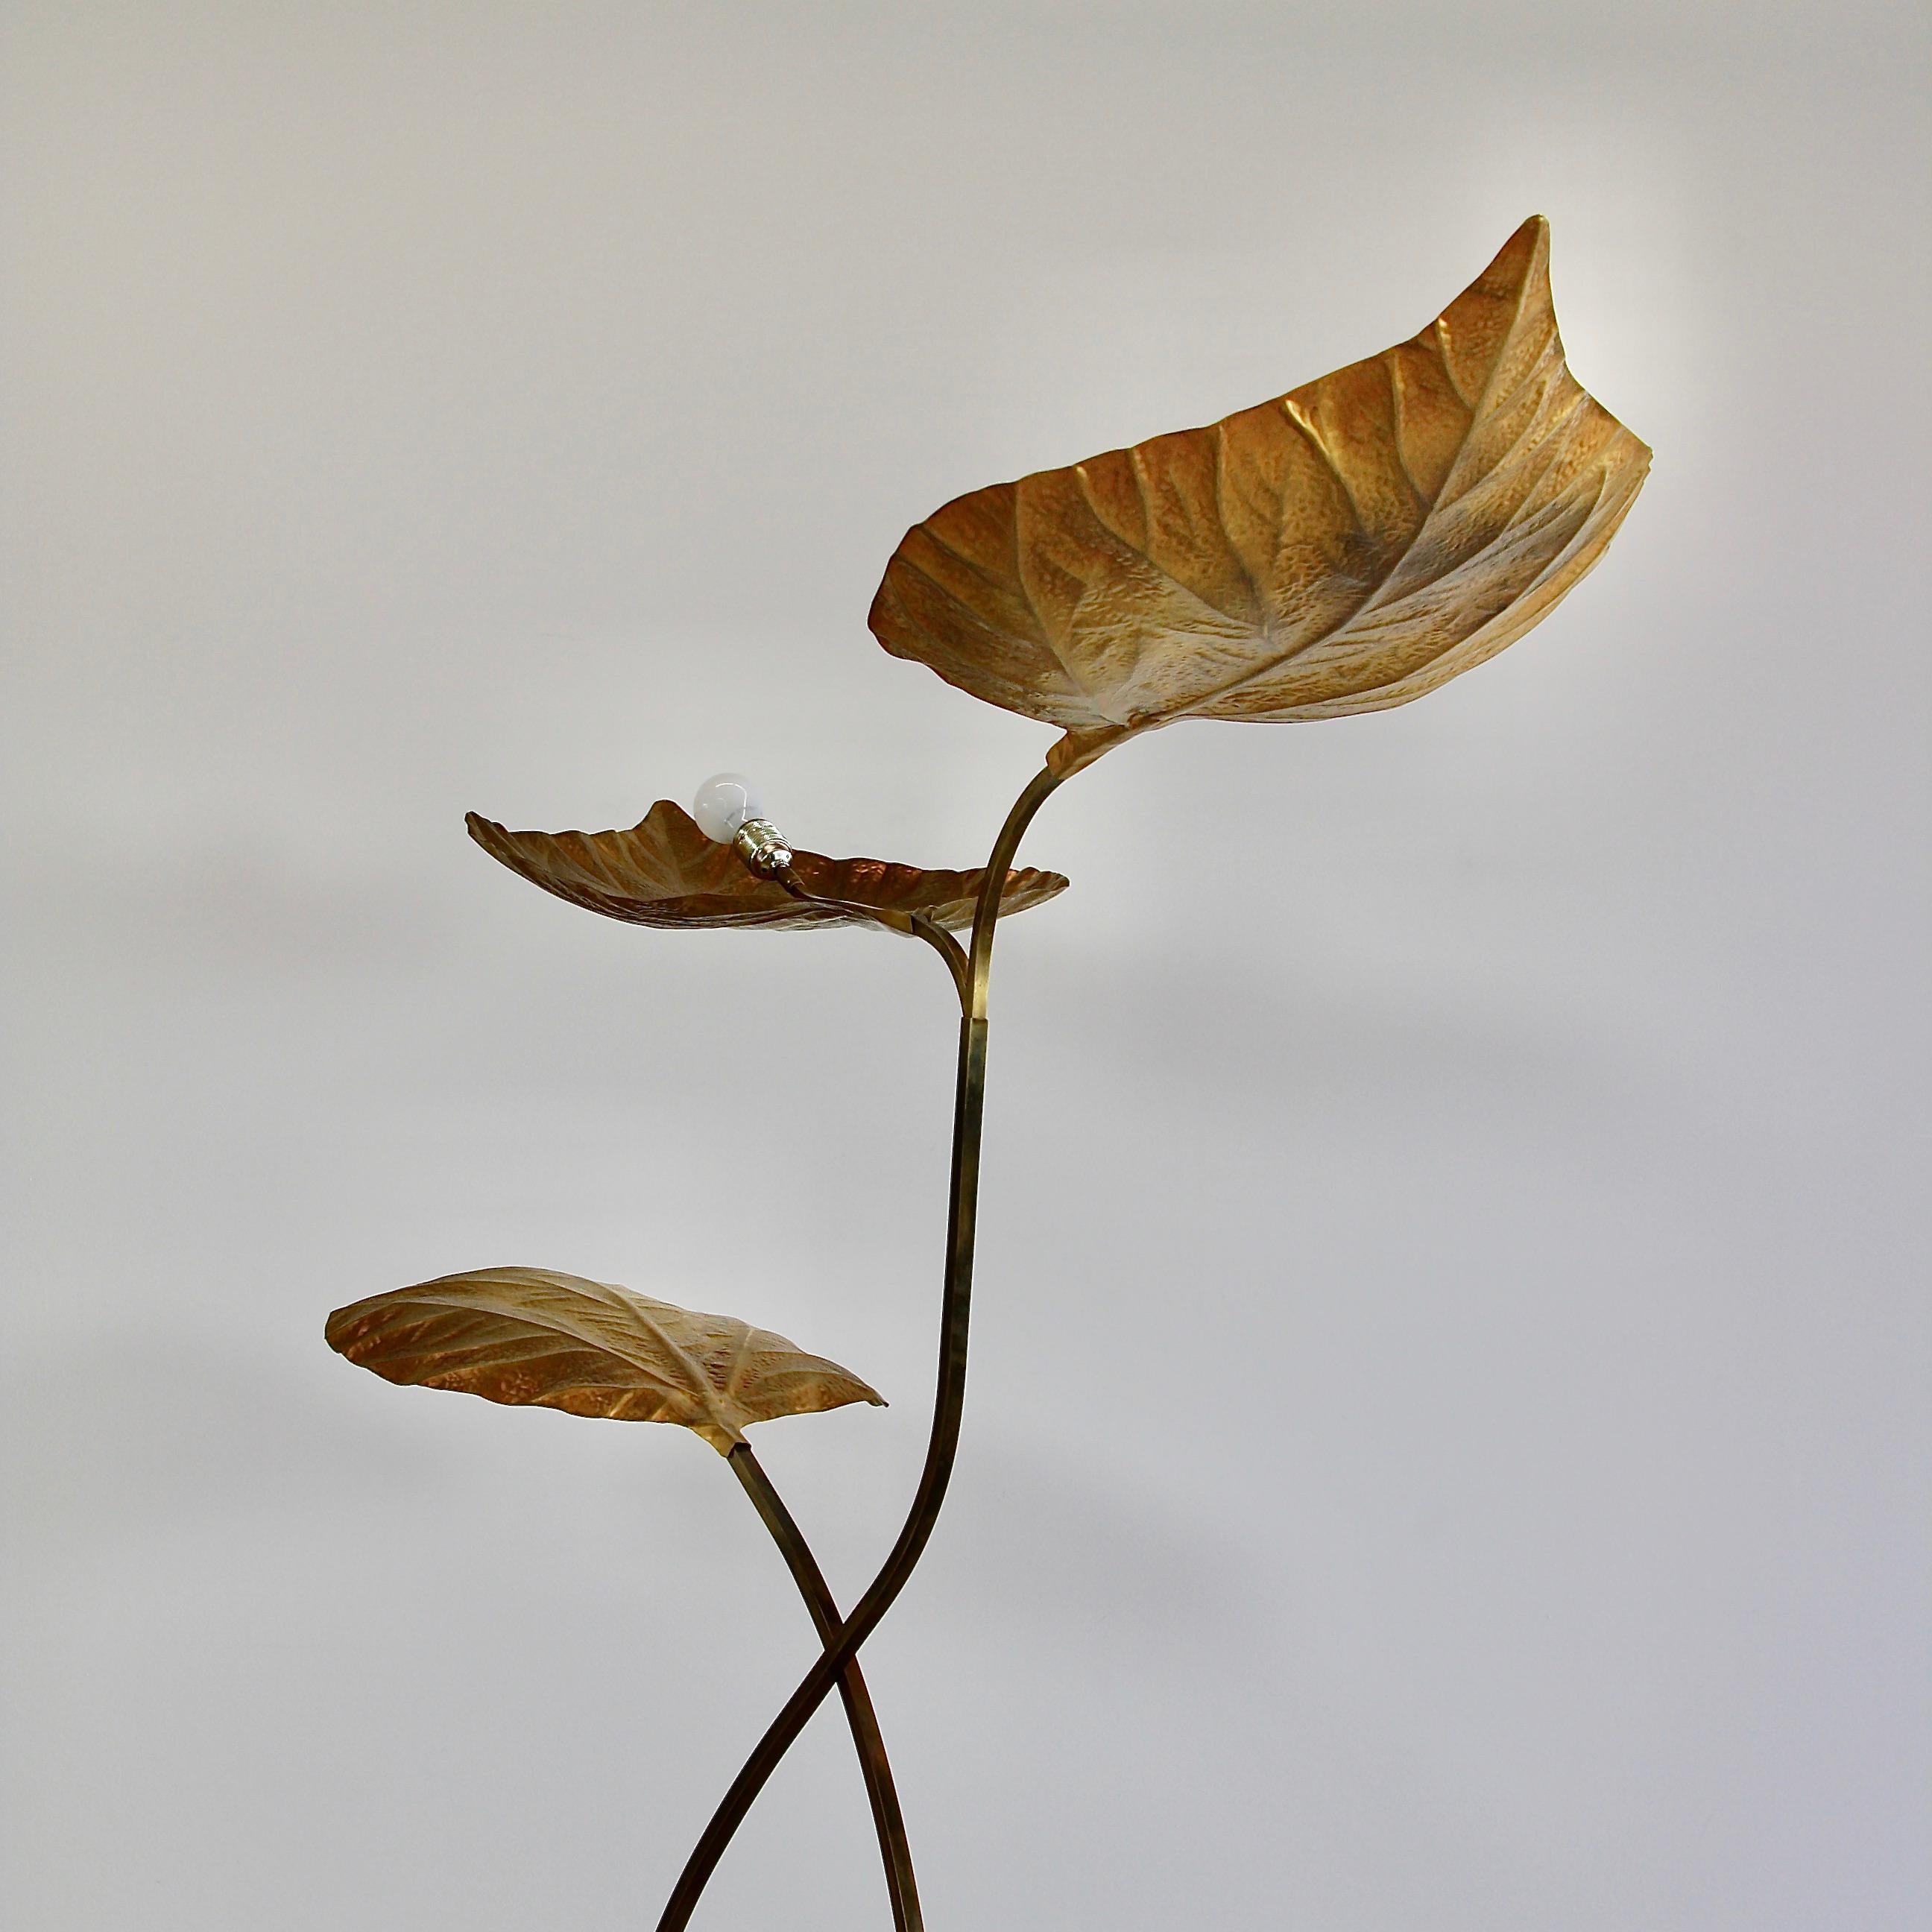 Floor lamp designed by Tommaso Barbi in the 1970s for Bottega Gadda, Italy.

Brass lamp with the three-light fittings. Three-leaf model of the 'Rababarbo' or rhubarb leaf floor lamp with embossed leaves. Handmade using repousse and chasing